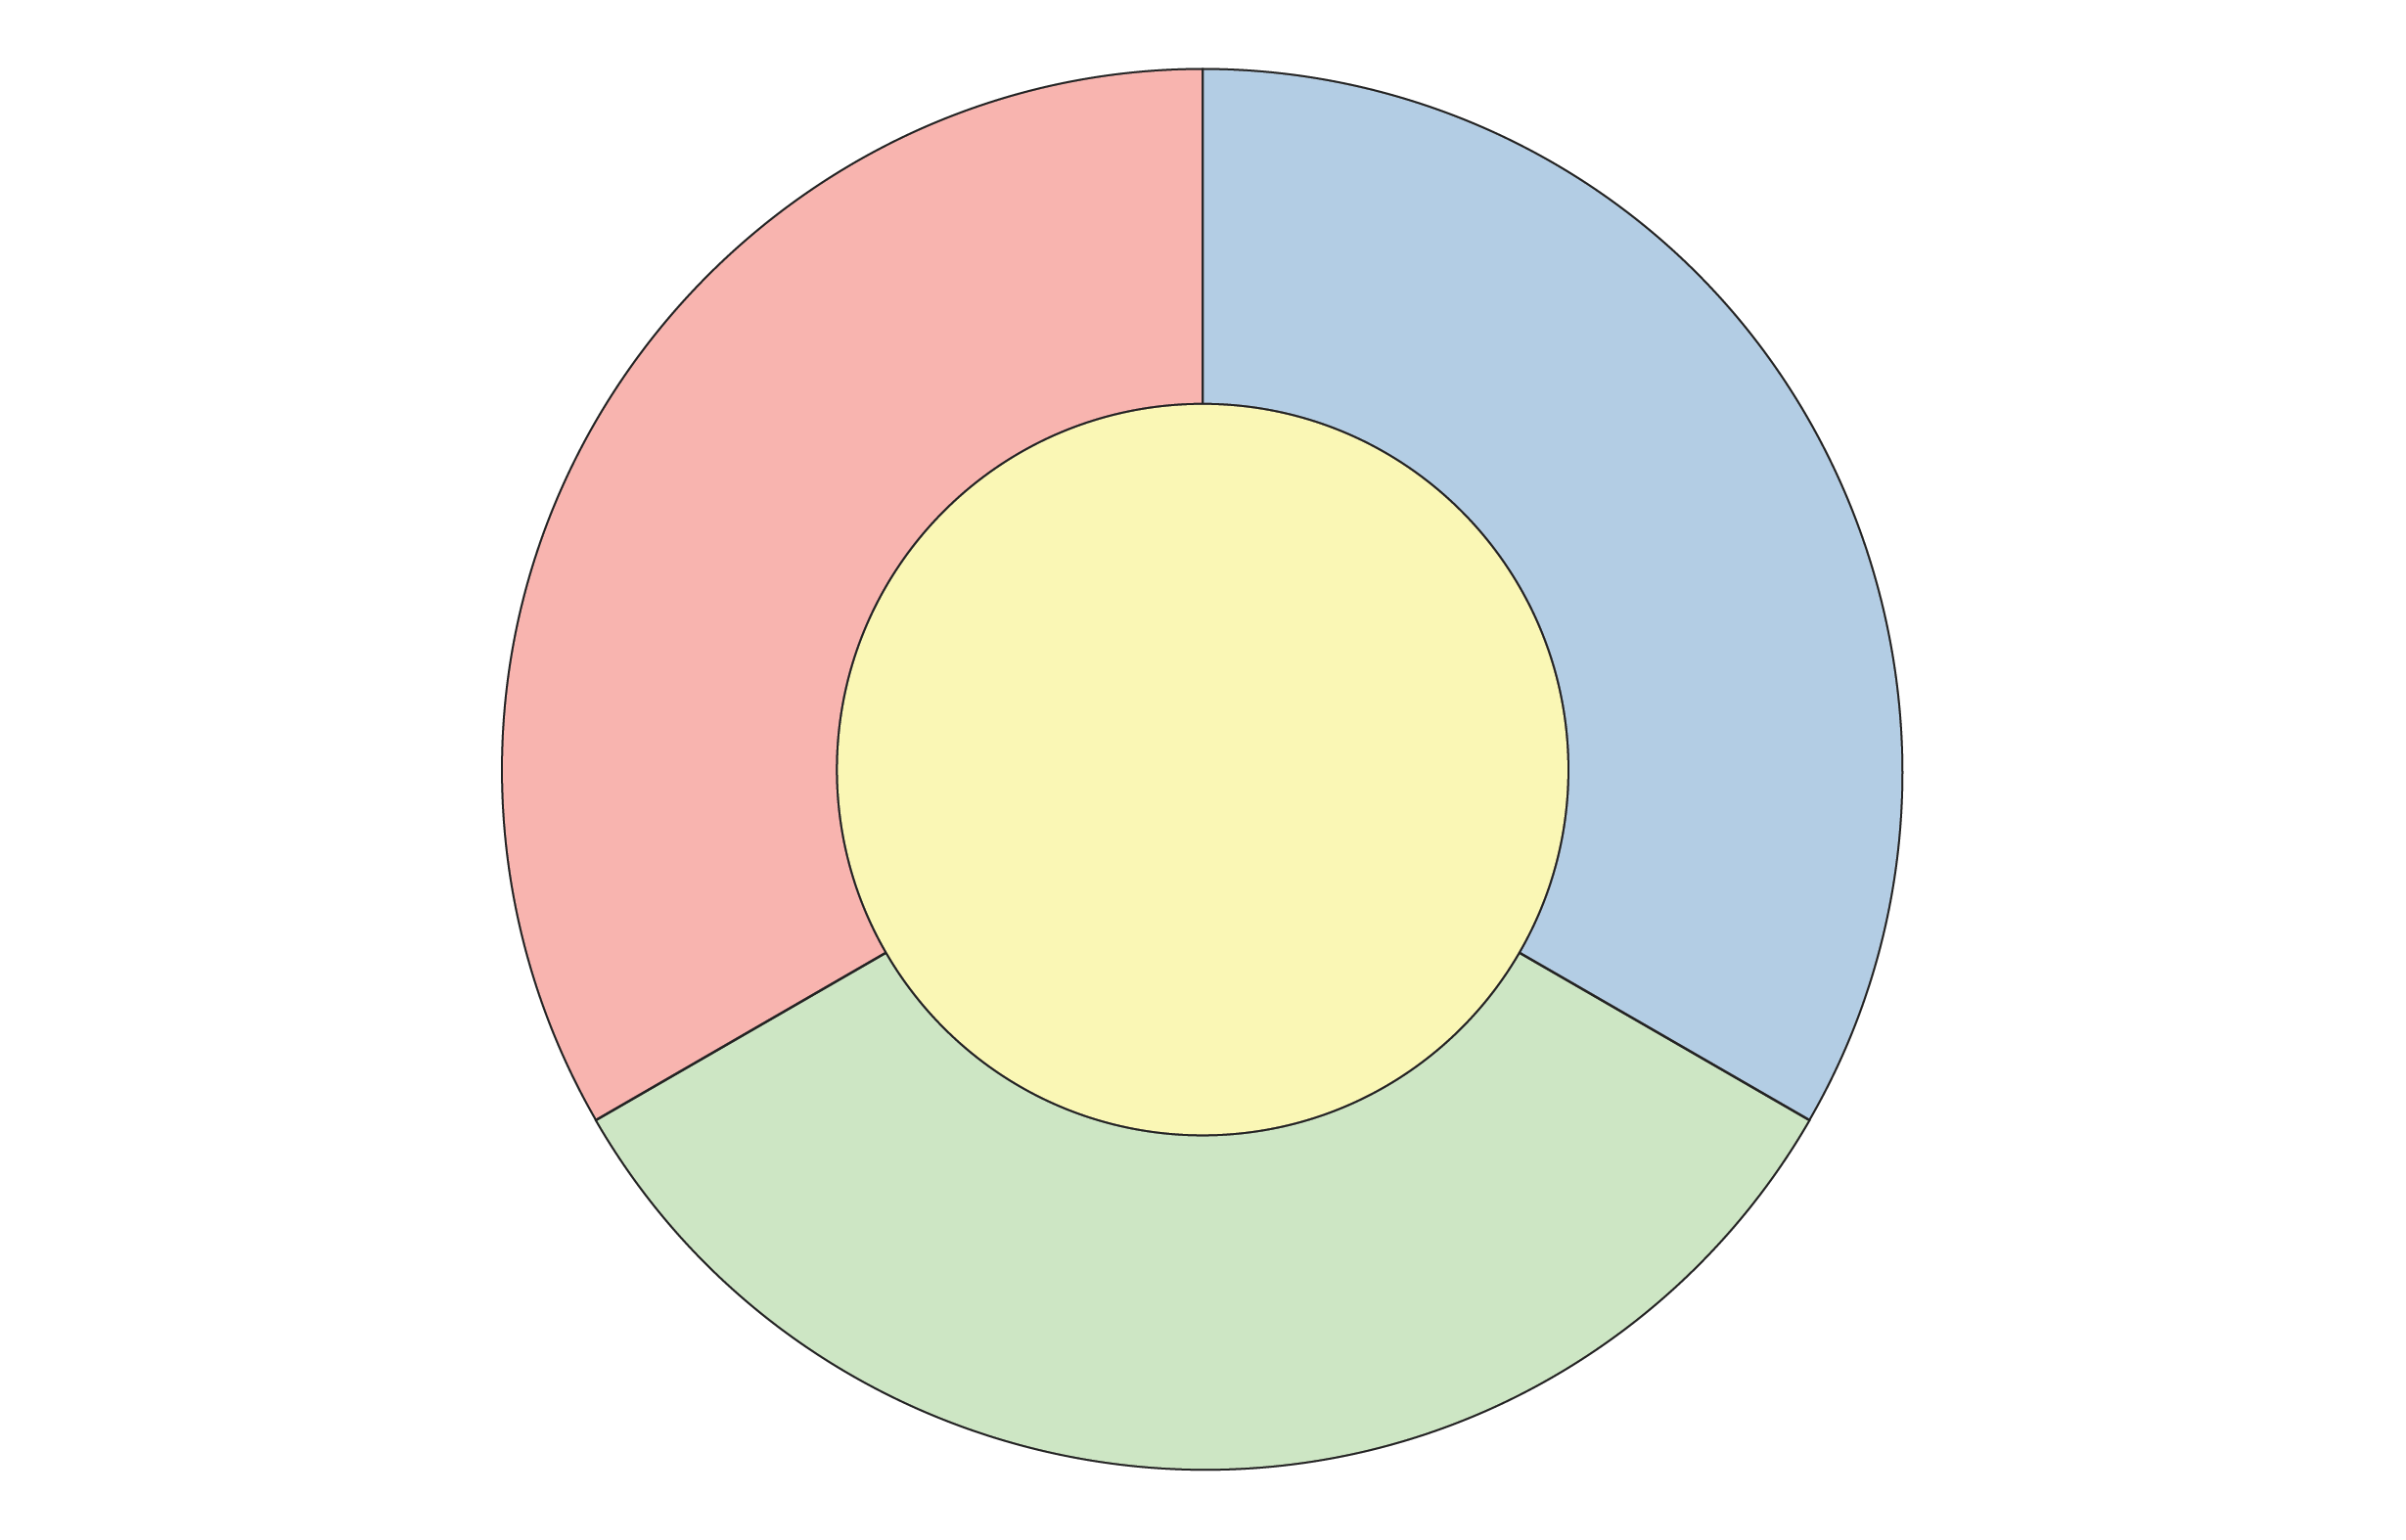 A diagram of a yellow circle wrapped by a ring divided into three sections. Each section of the ring is colored in red, blue or green.